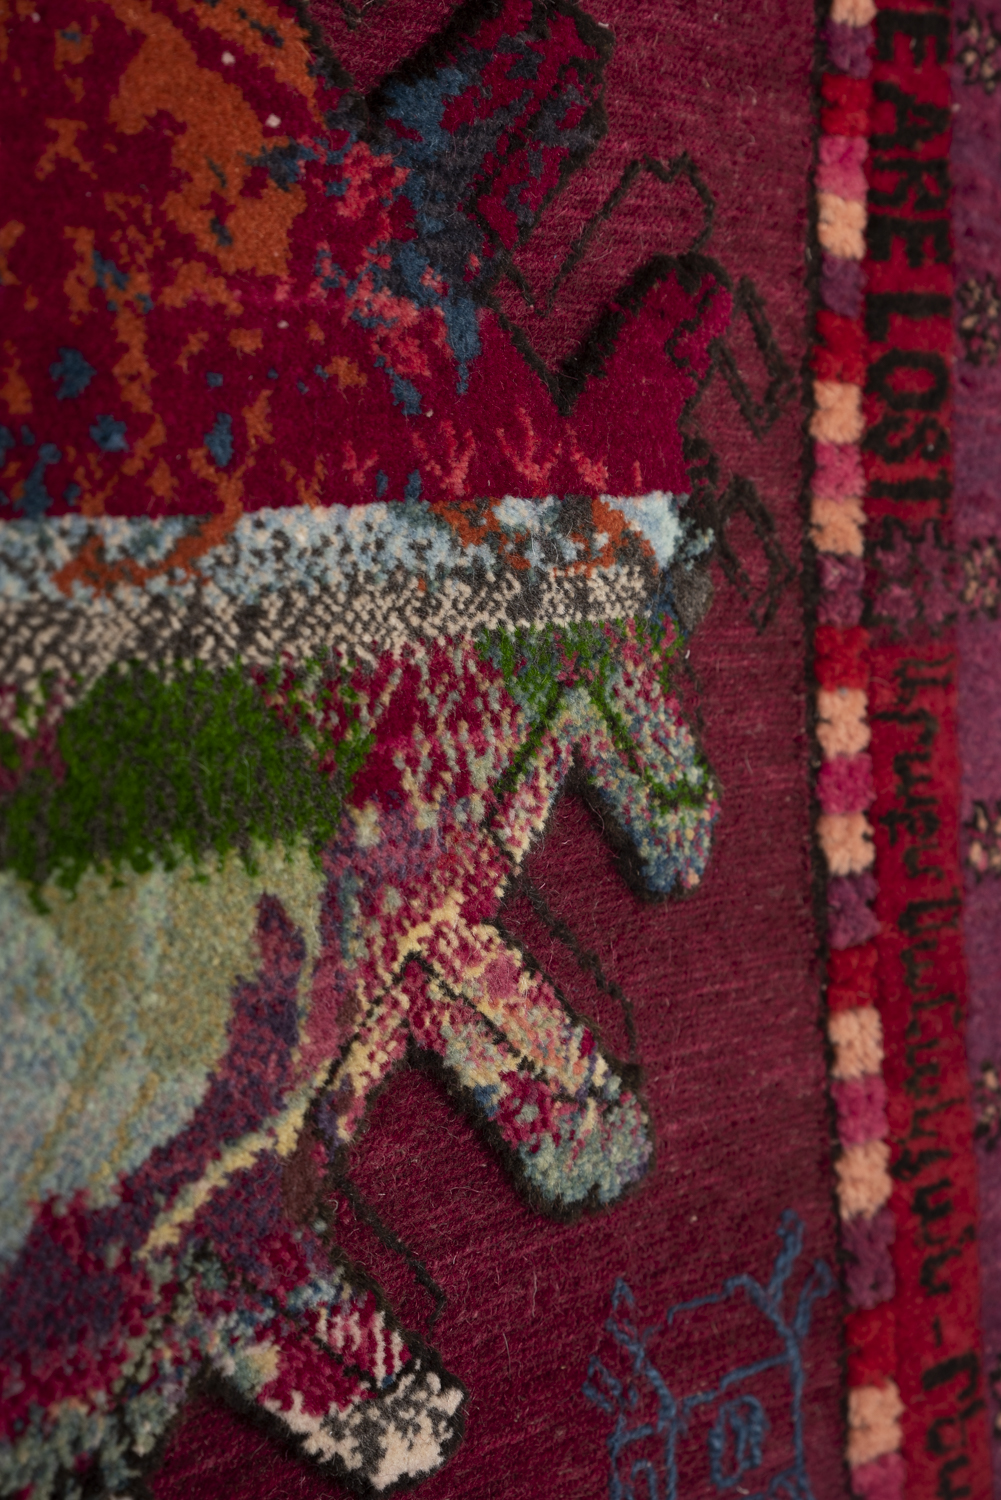 Araks Sahakyan & Rebecca Topakian, Vordan Karmir (detail), 2022, Handwoven rug, made in Tsovagyugh, Armenia, Natural wool, natural and non natural dyes, 100 x 170 cm 
With the support of Bourse Transverse - ADAGP, FreeLens and Sometimes Éditions.